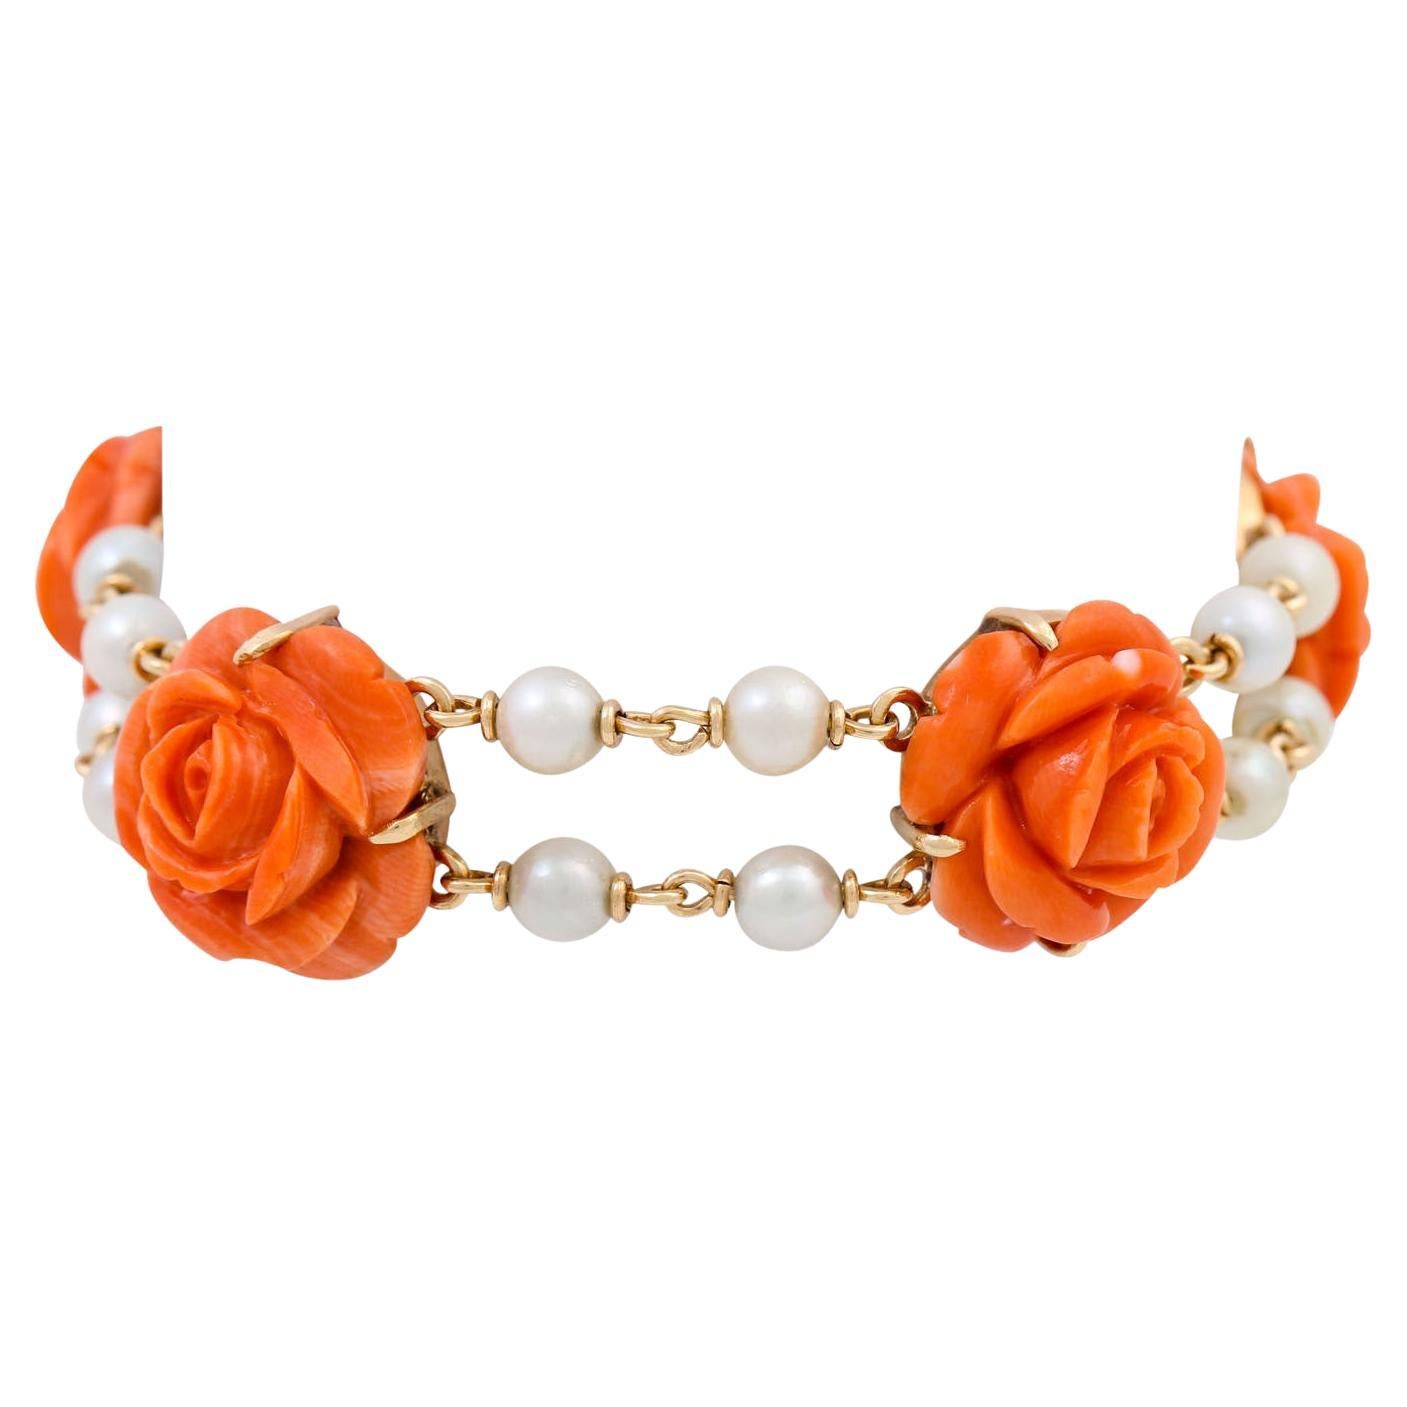 Bracelet with Precious Coral Cut in the Shape of a Rose For Sale